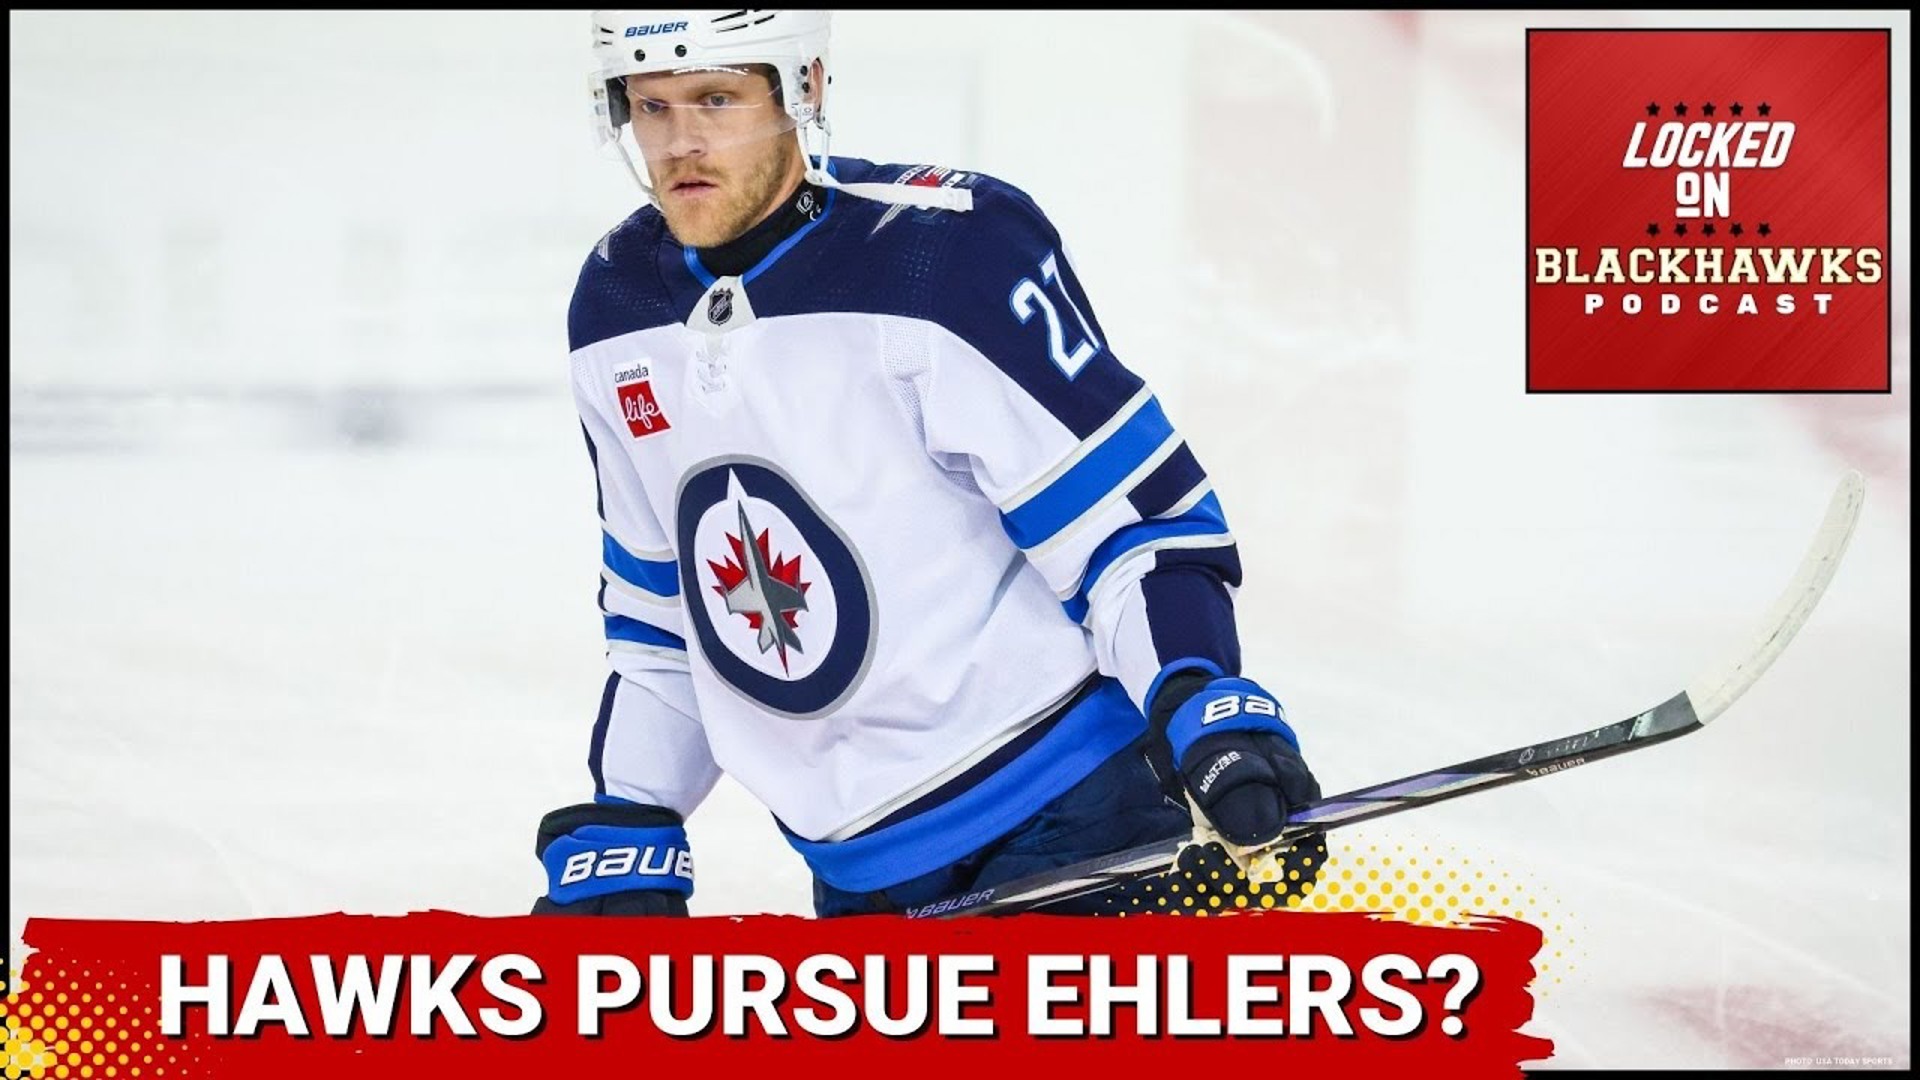 Tuesday's episode begins with a discussion over whether the Chicago Blackhawks should try and target Winnipeg Jets' forwards Rutger McGroarty and Nikolaj Ehlers.